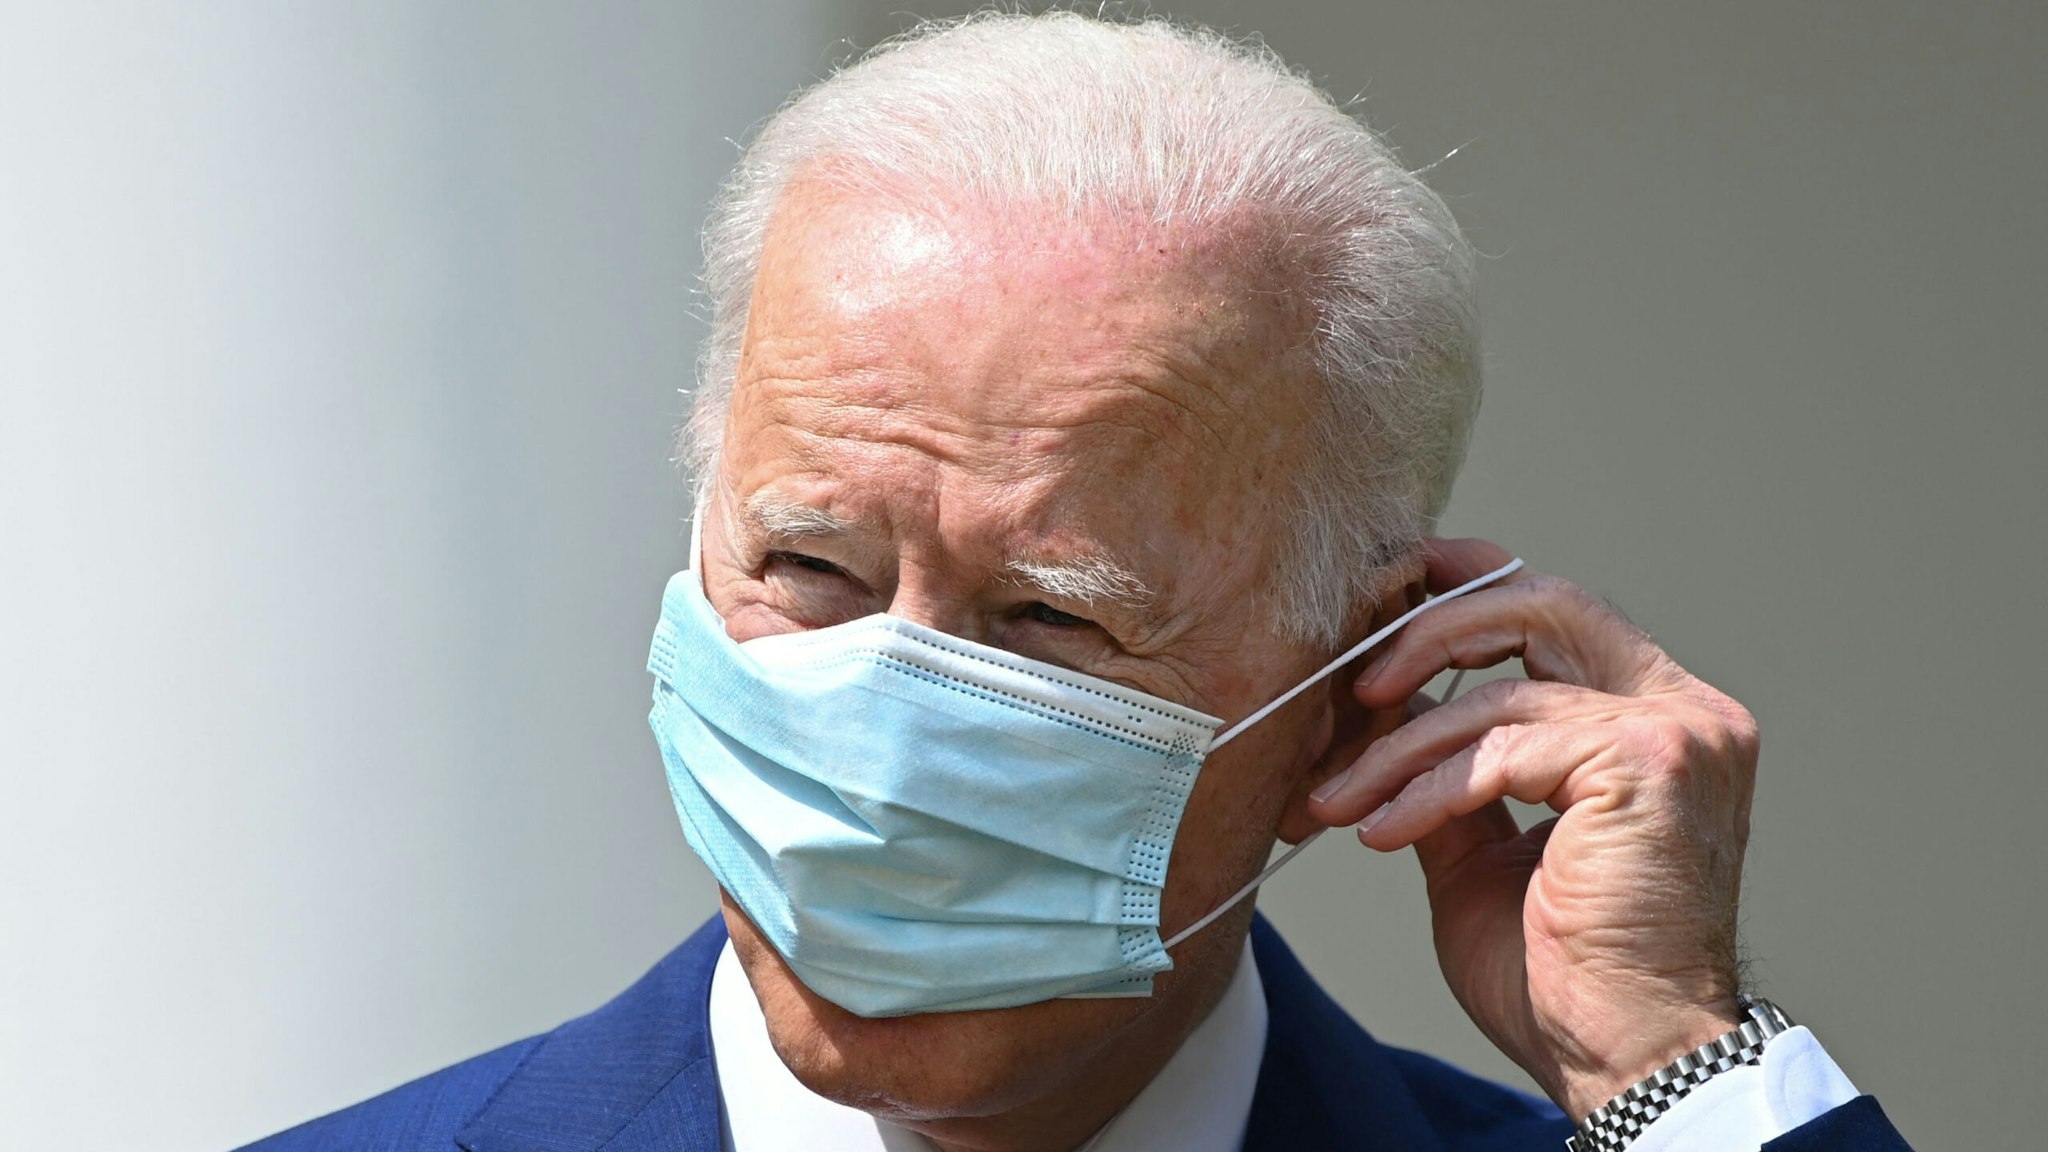 US President Joe Biden puts on his mask after speaking during an event about gun violence prevention in the Rose Garden of the White House in Washington, DC, on April 8, 2021. - Biden on Thursday called US gun violence an "epidemic" at a White House ceremony to unveil new attempts to get the problem under control.